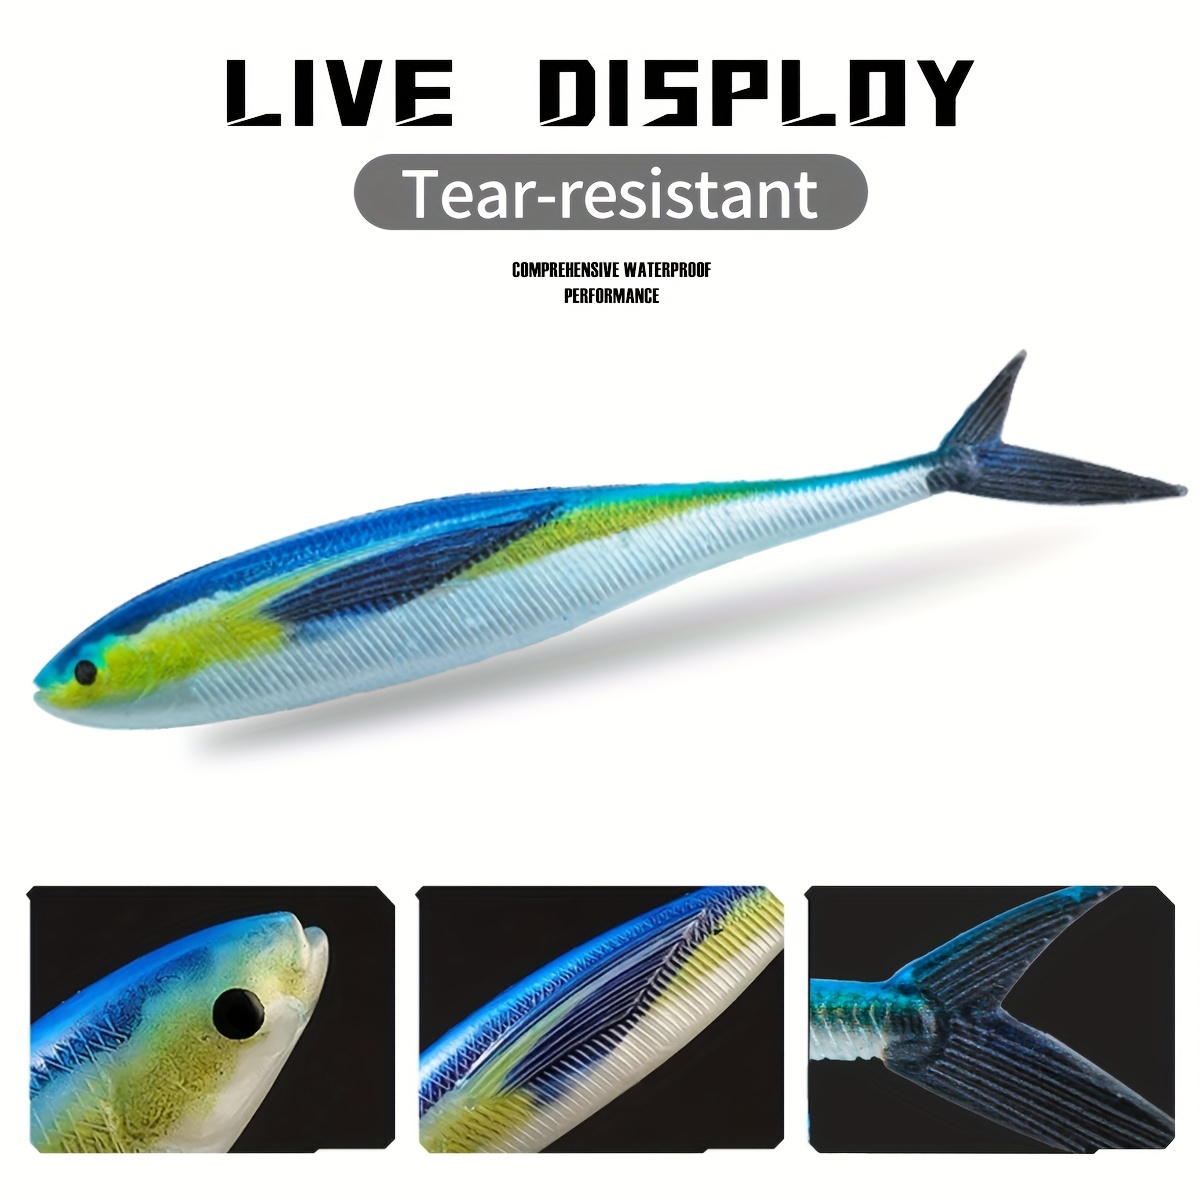 BrilliantDay Artificial Fishing Lure Kits Soft Lure Palestine